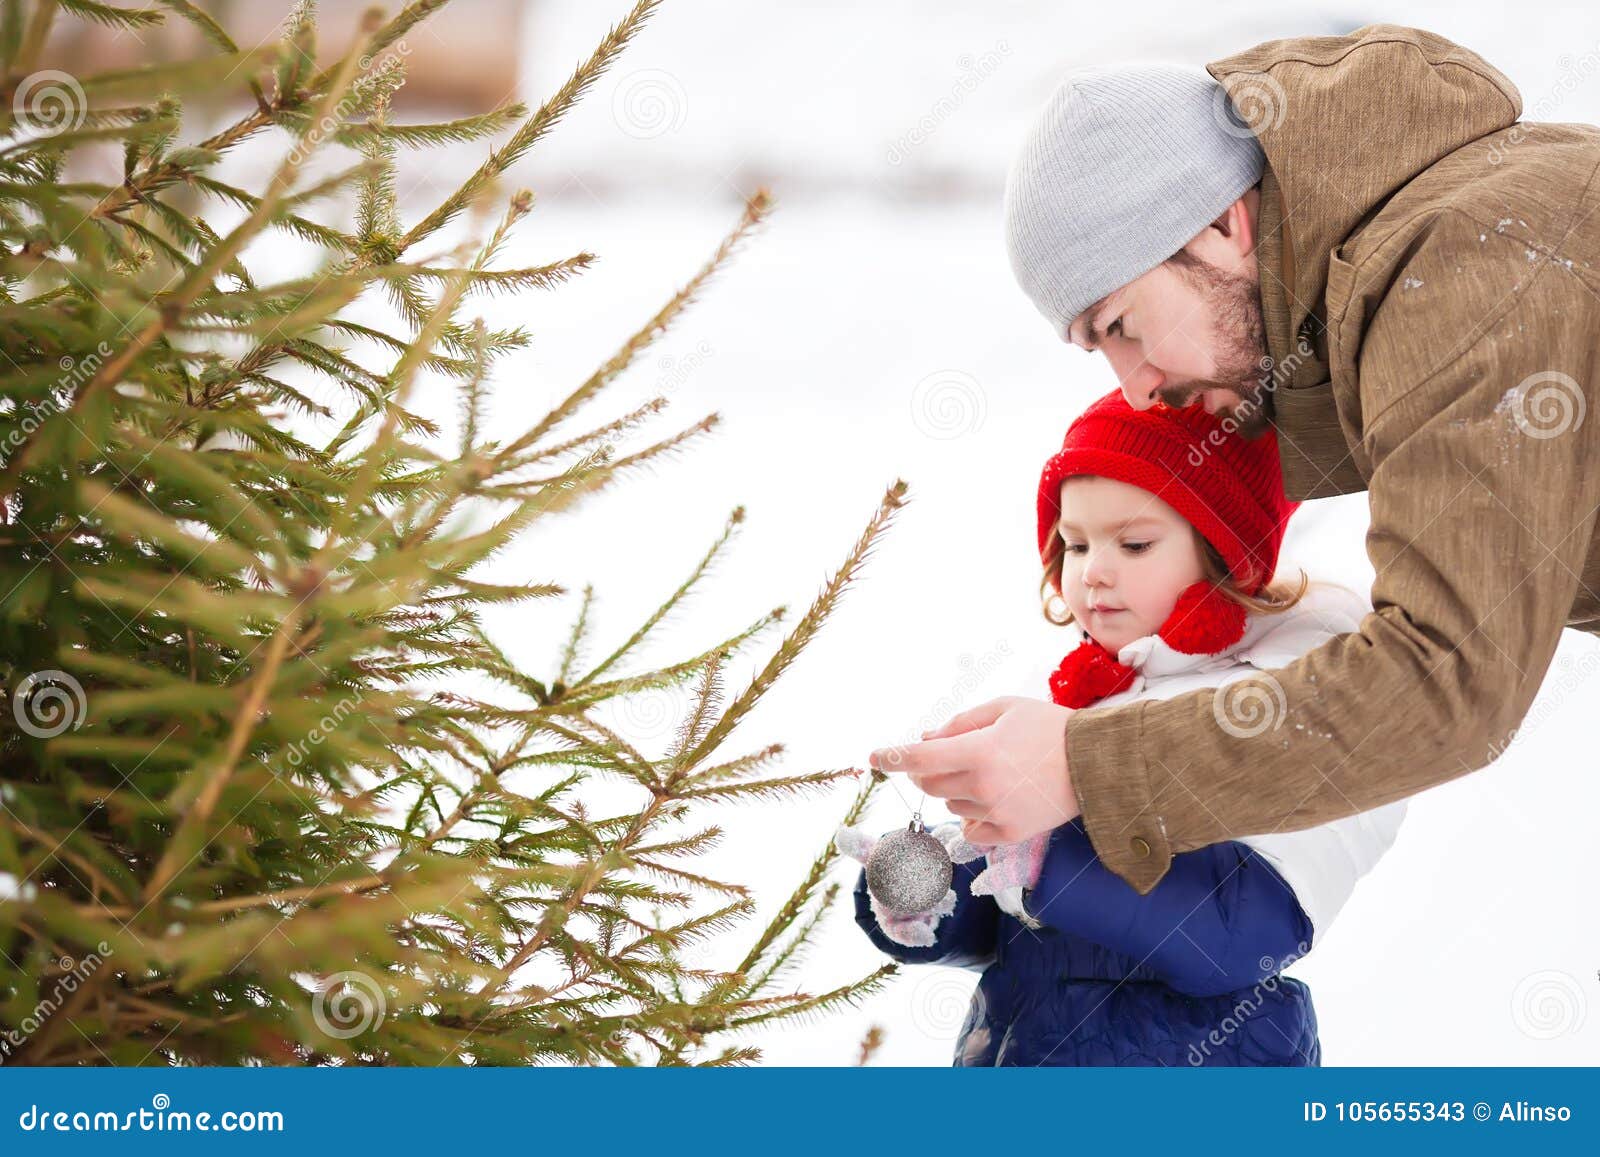 A Little Girl Helps Her Father Decorate a Christmas Tree Outdoors ...